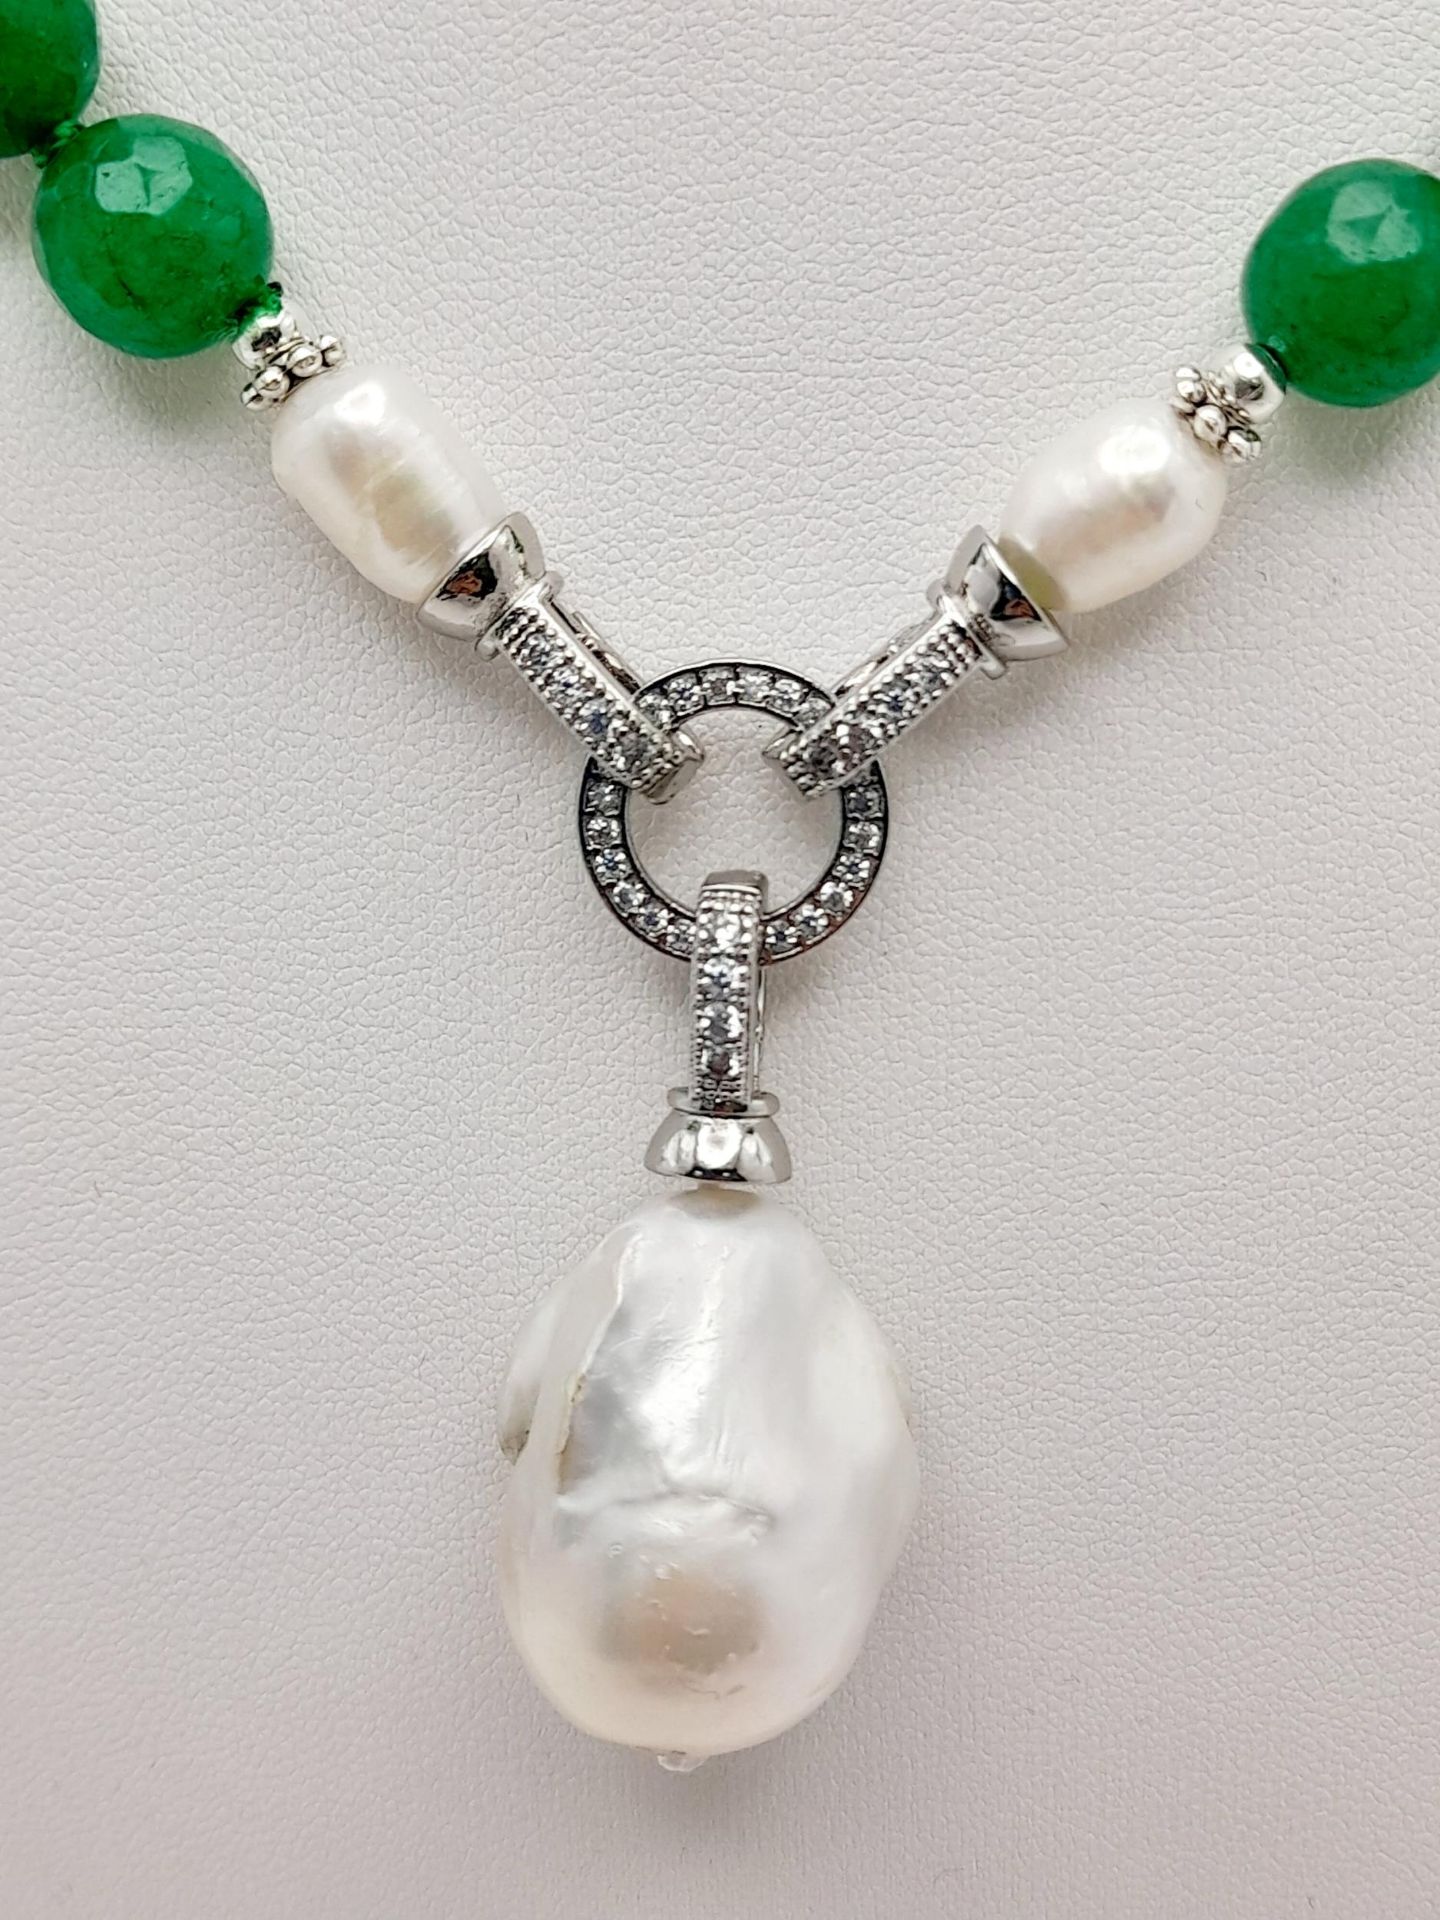 A Faceted Green Jade Necklace with Hanging Baroque Pearl Pendant. Cultured pearl and white stone - Image 2 of 3